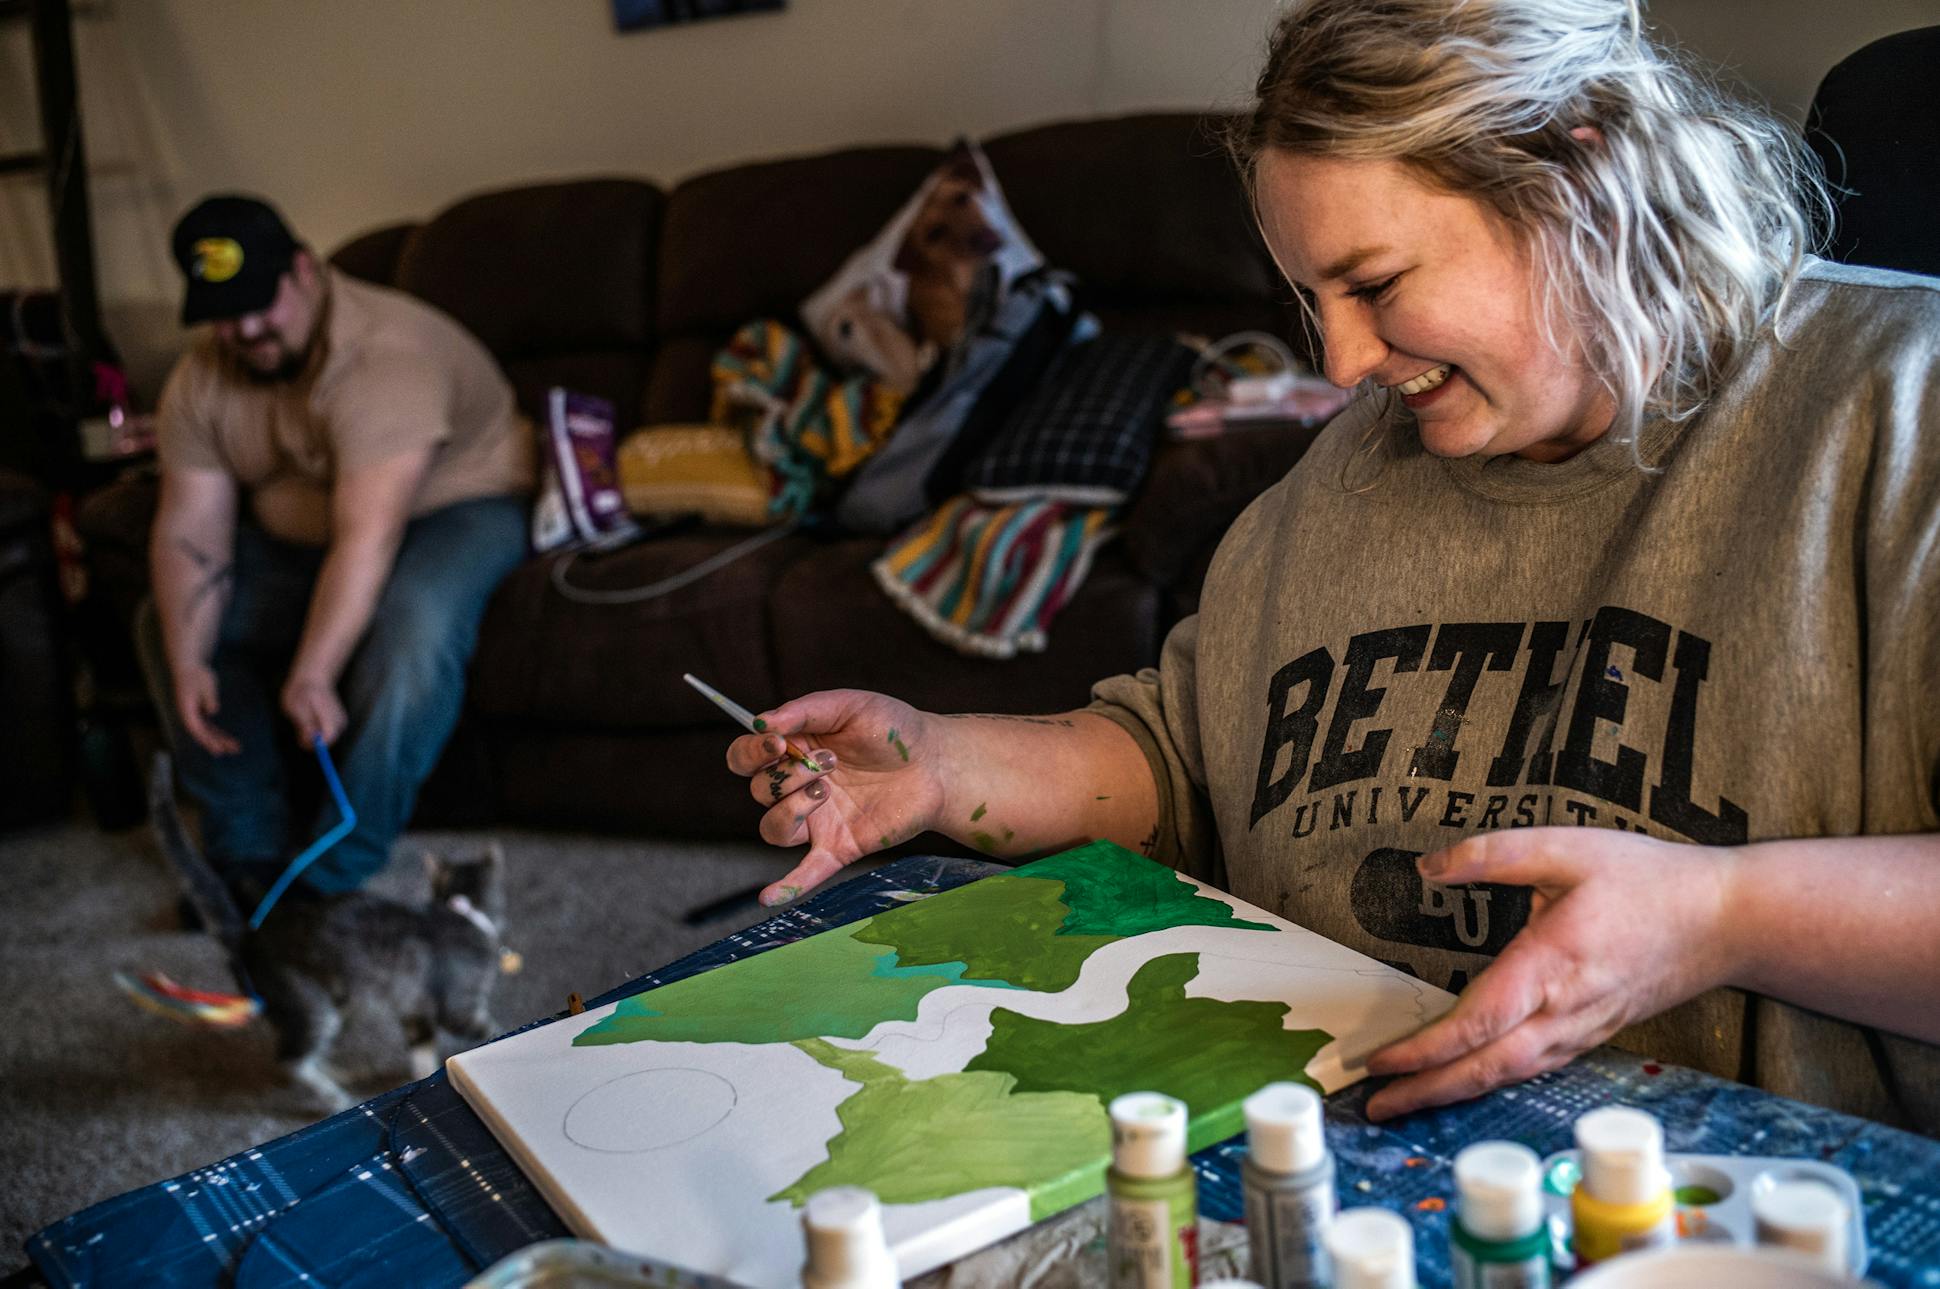 In order to prioritize her mental health recovery, Rylie Perkins left softball behind. Competing was a trigger for her eating disorder, she said. Now, “I'm working towards acceptance that my body is a vessel,” Perkins said, “and it's beautiful no matter what size, what shape it is.”